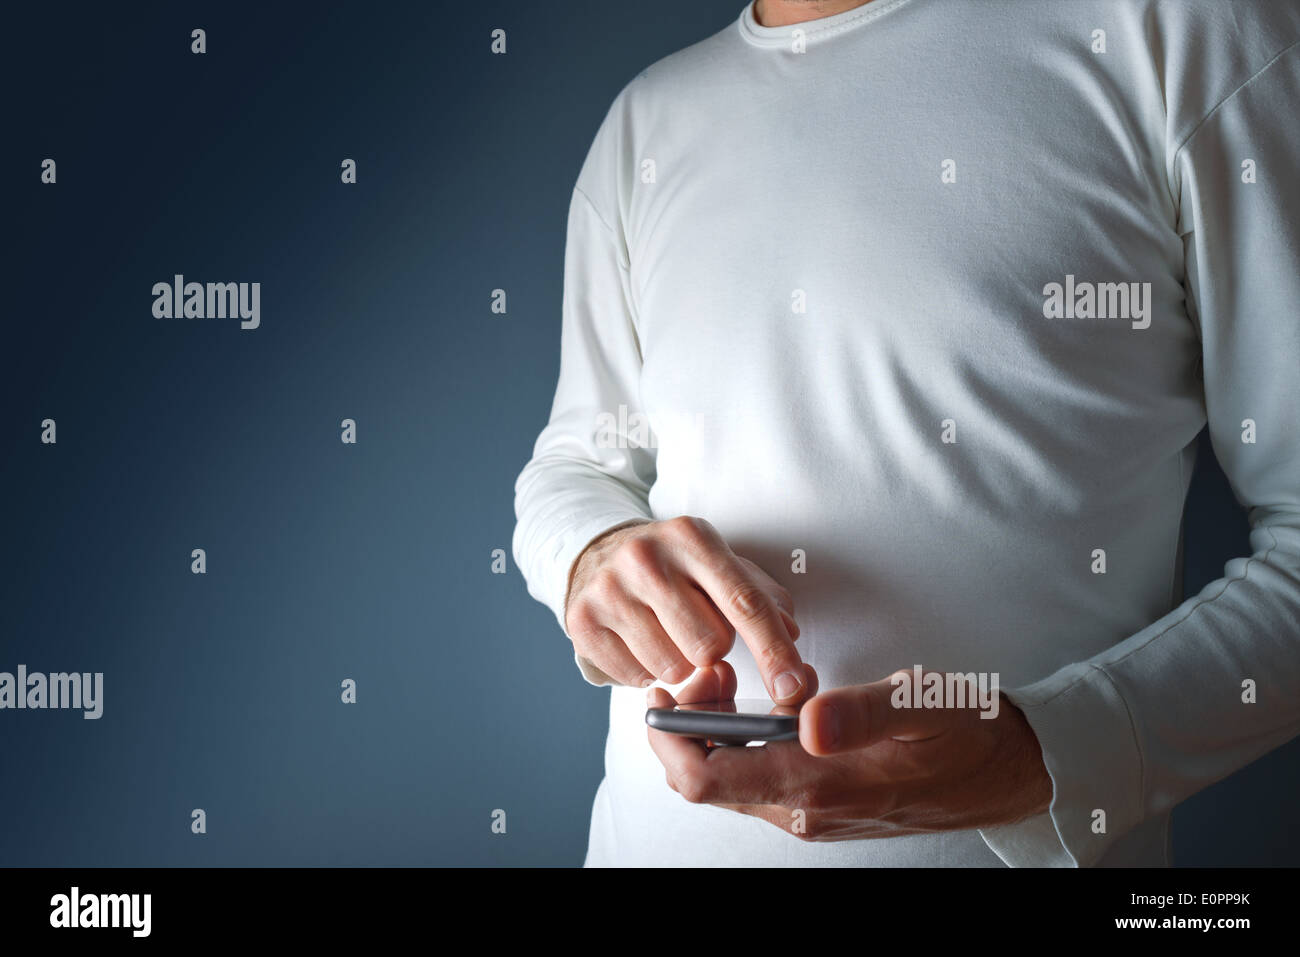 Man in white shirt using mobile smart phone device. Stock Photo